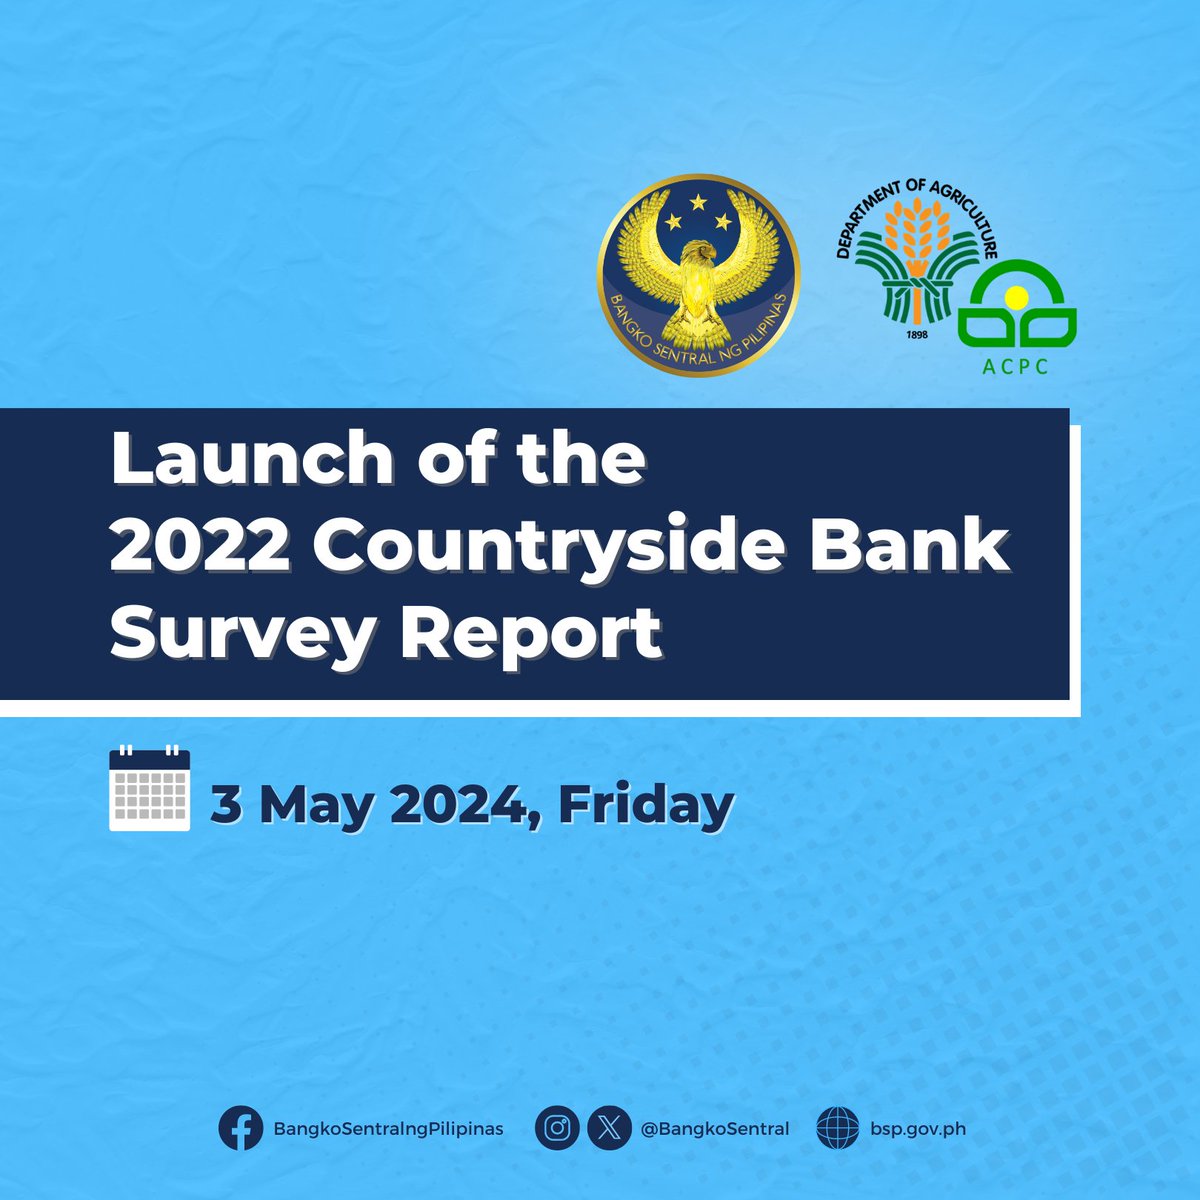 The Bangko Sentral ng Pilipinas and the Department of Agriculture-Agricultural Credit Policy Council (ACPC), will launch the 2022 Countryside Bank Survey Report on 03 May 2024. The report will be available at bsp.gov.ph